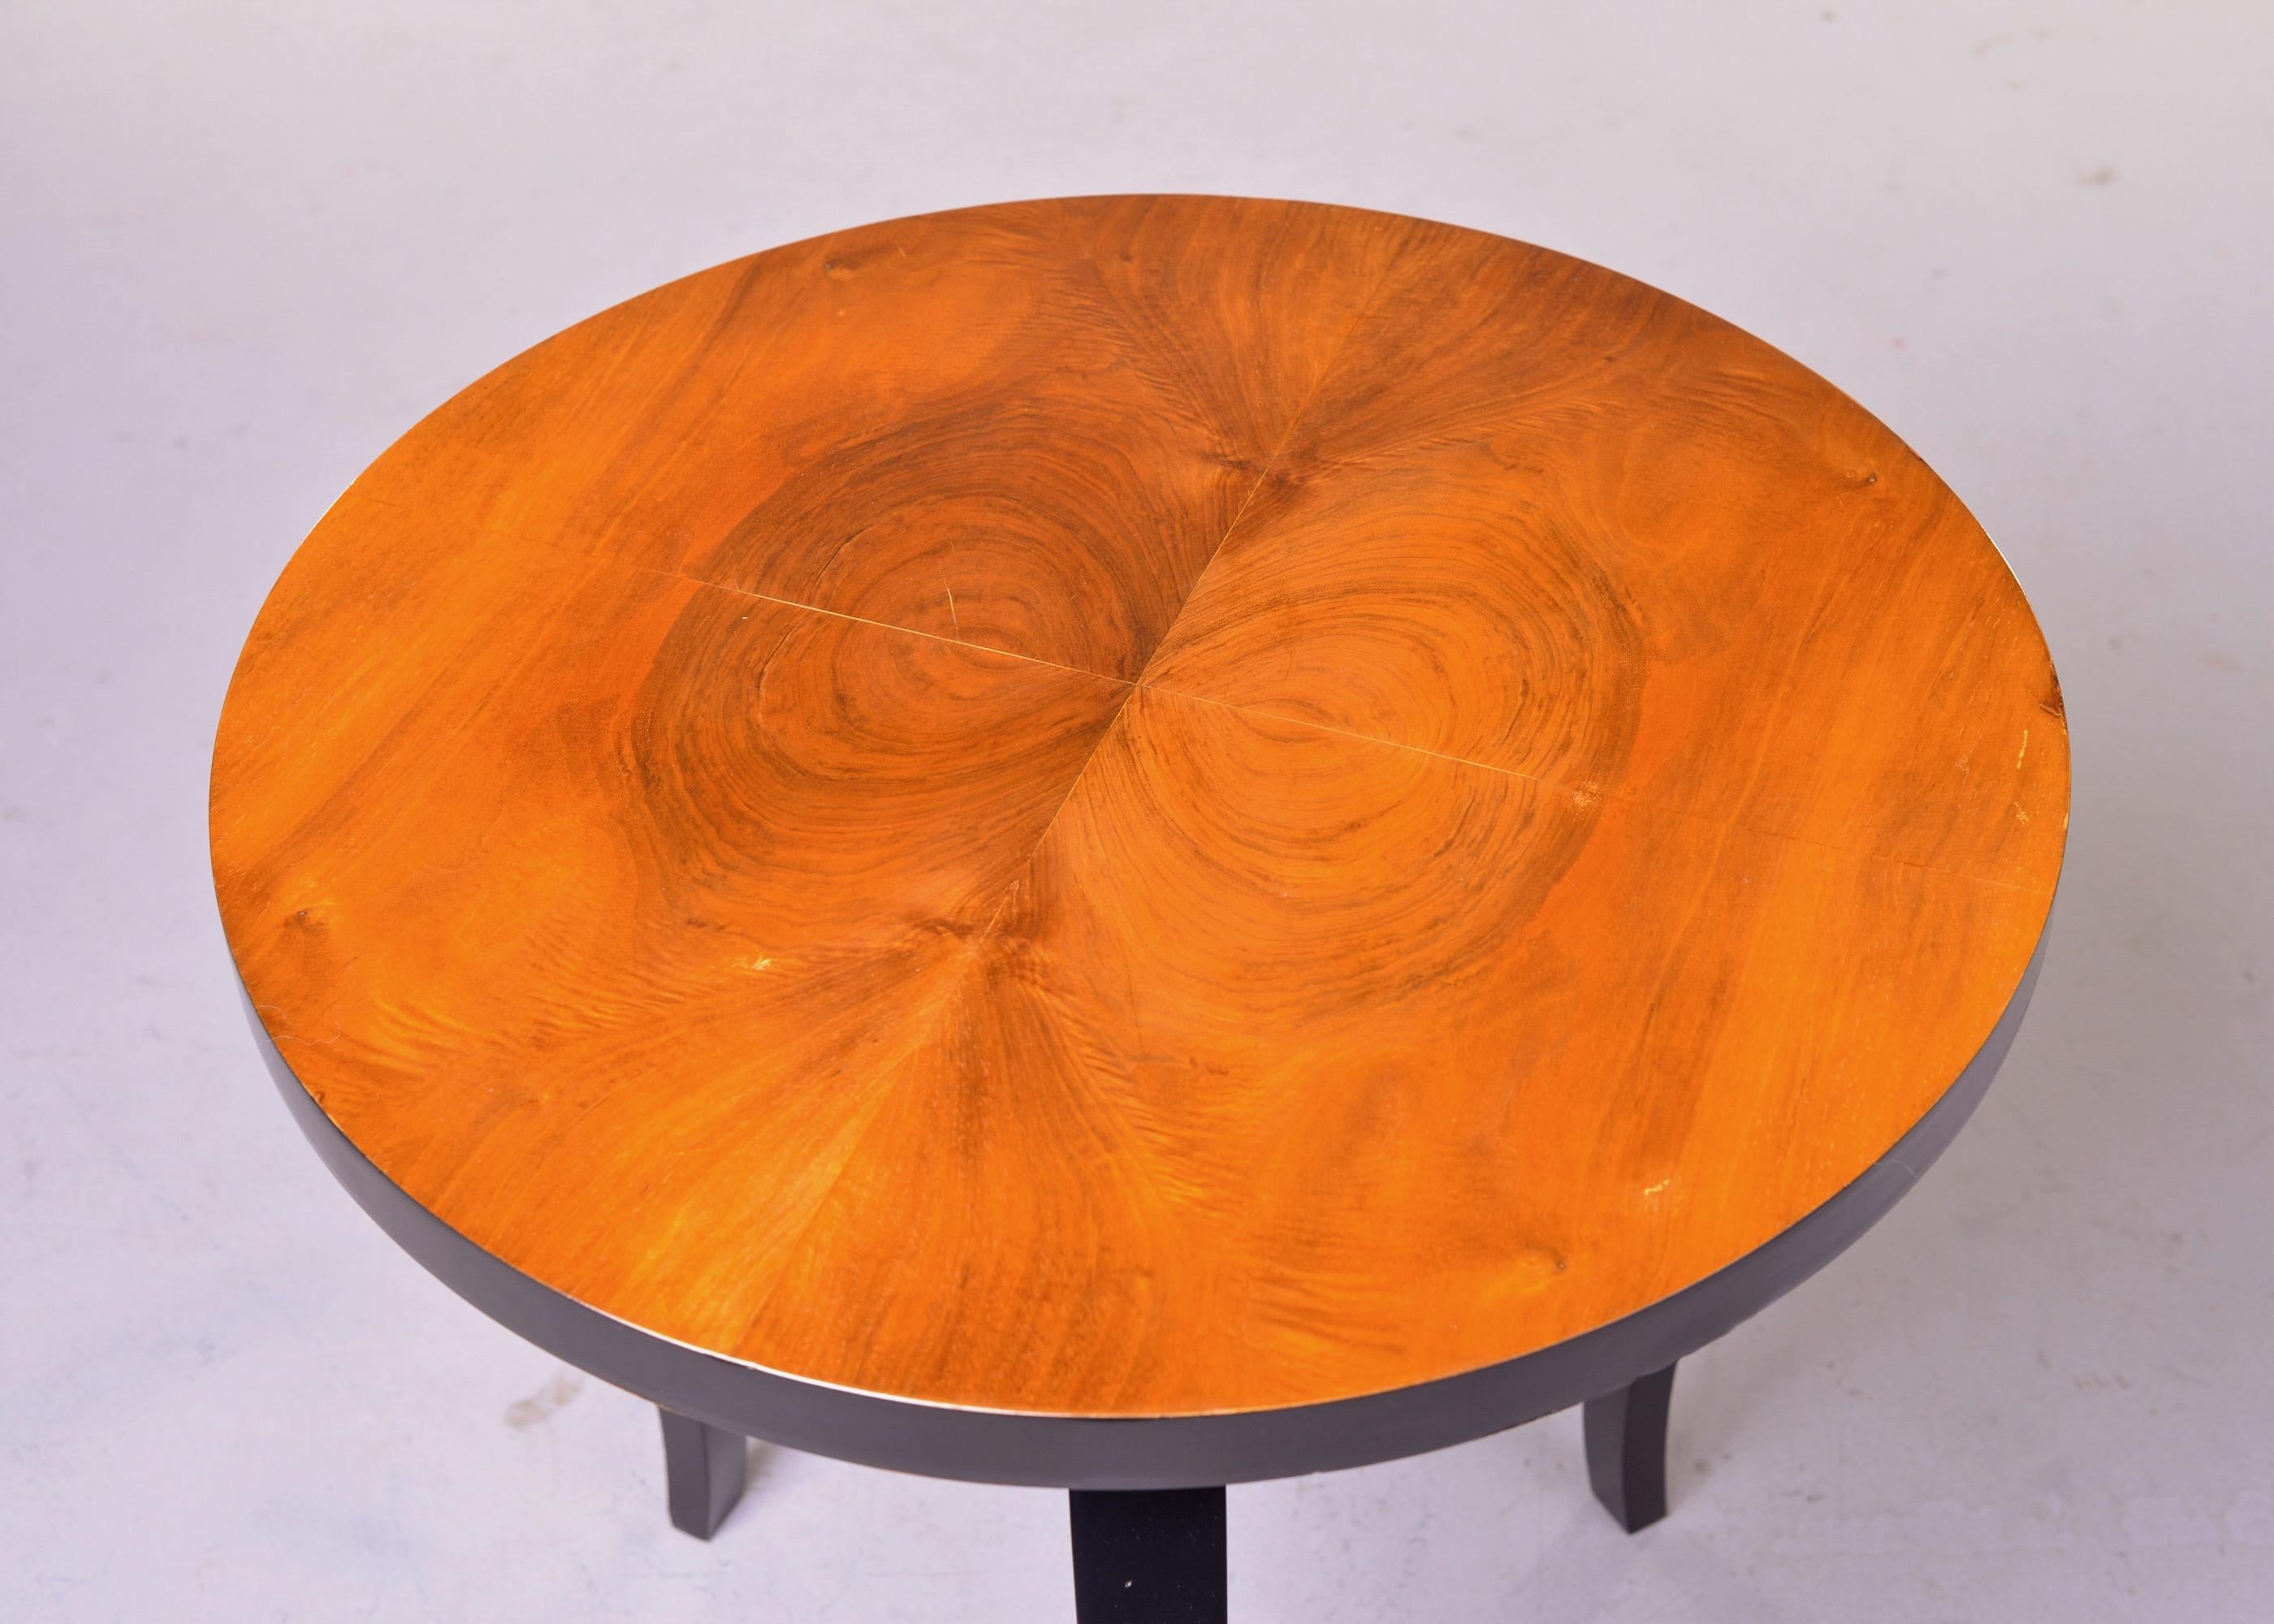 French Art Deco Round Burl Wood Side Table with Black Legs For Sale 1